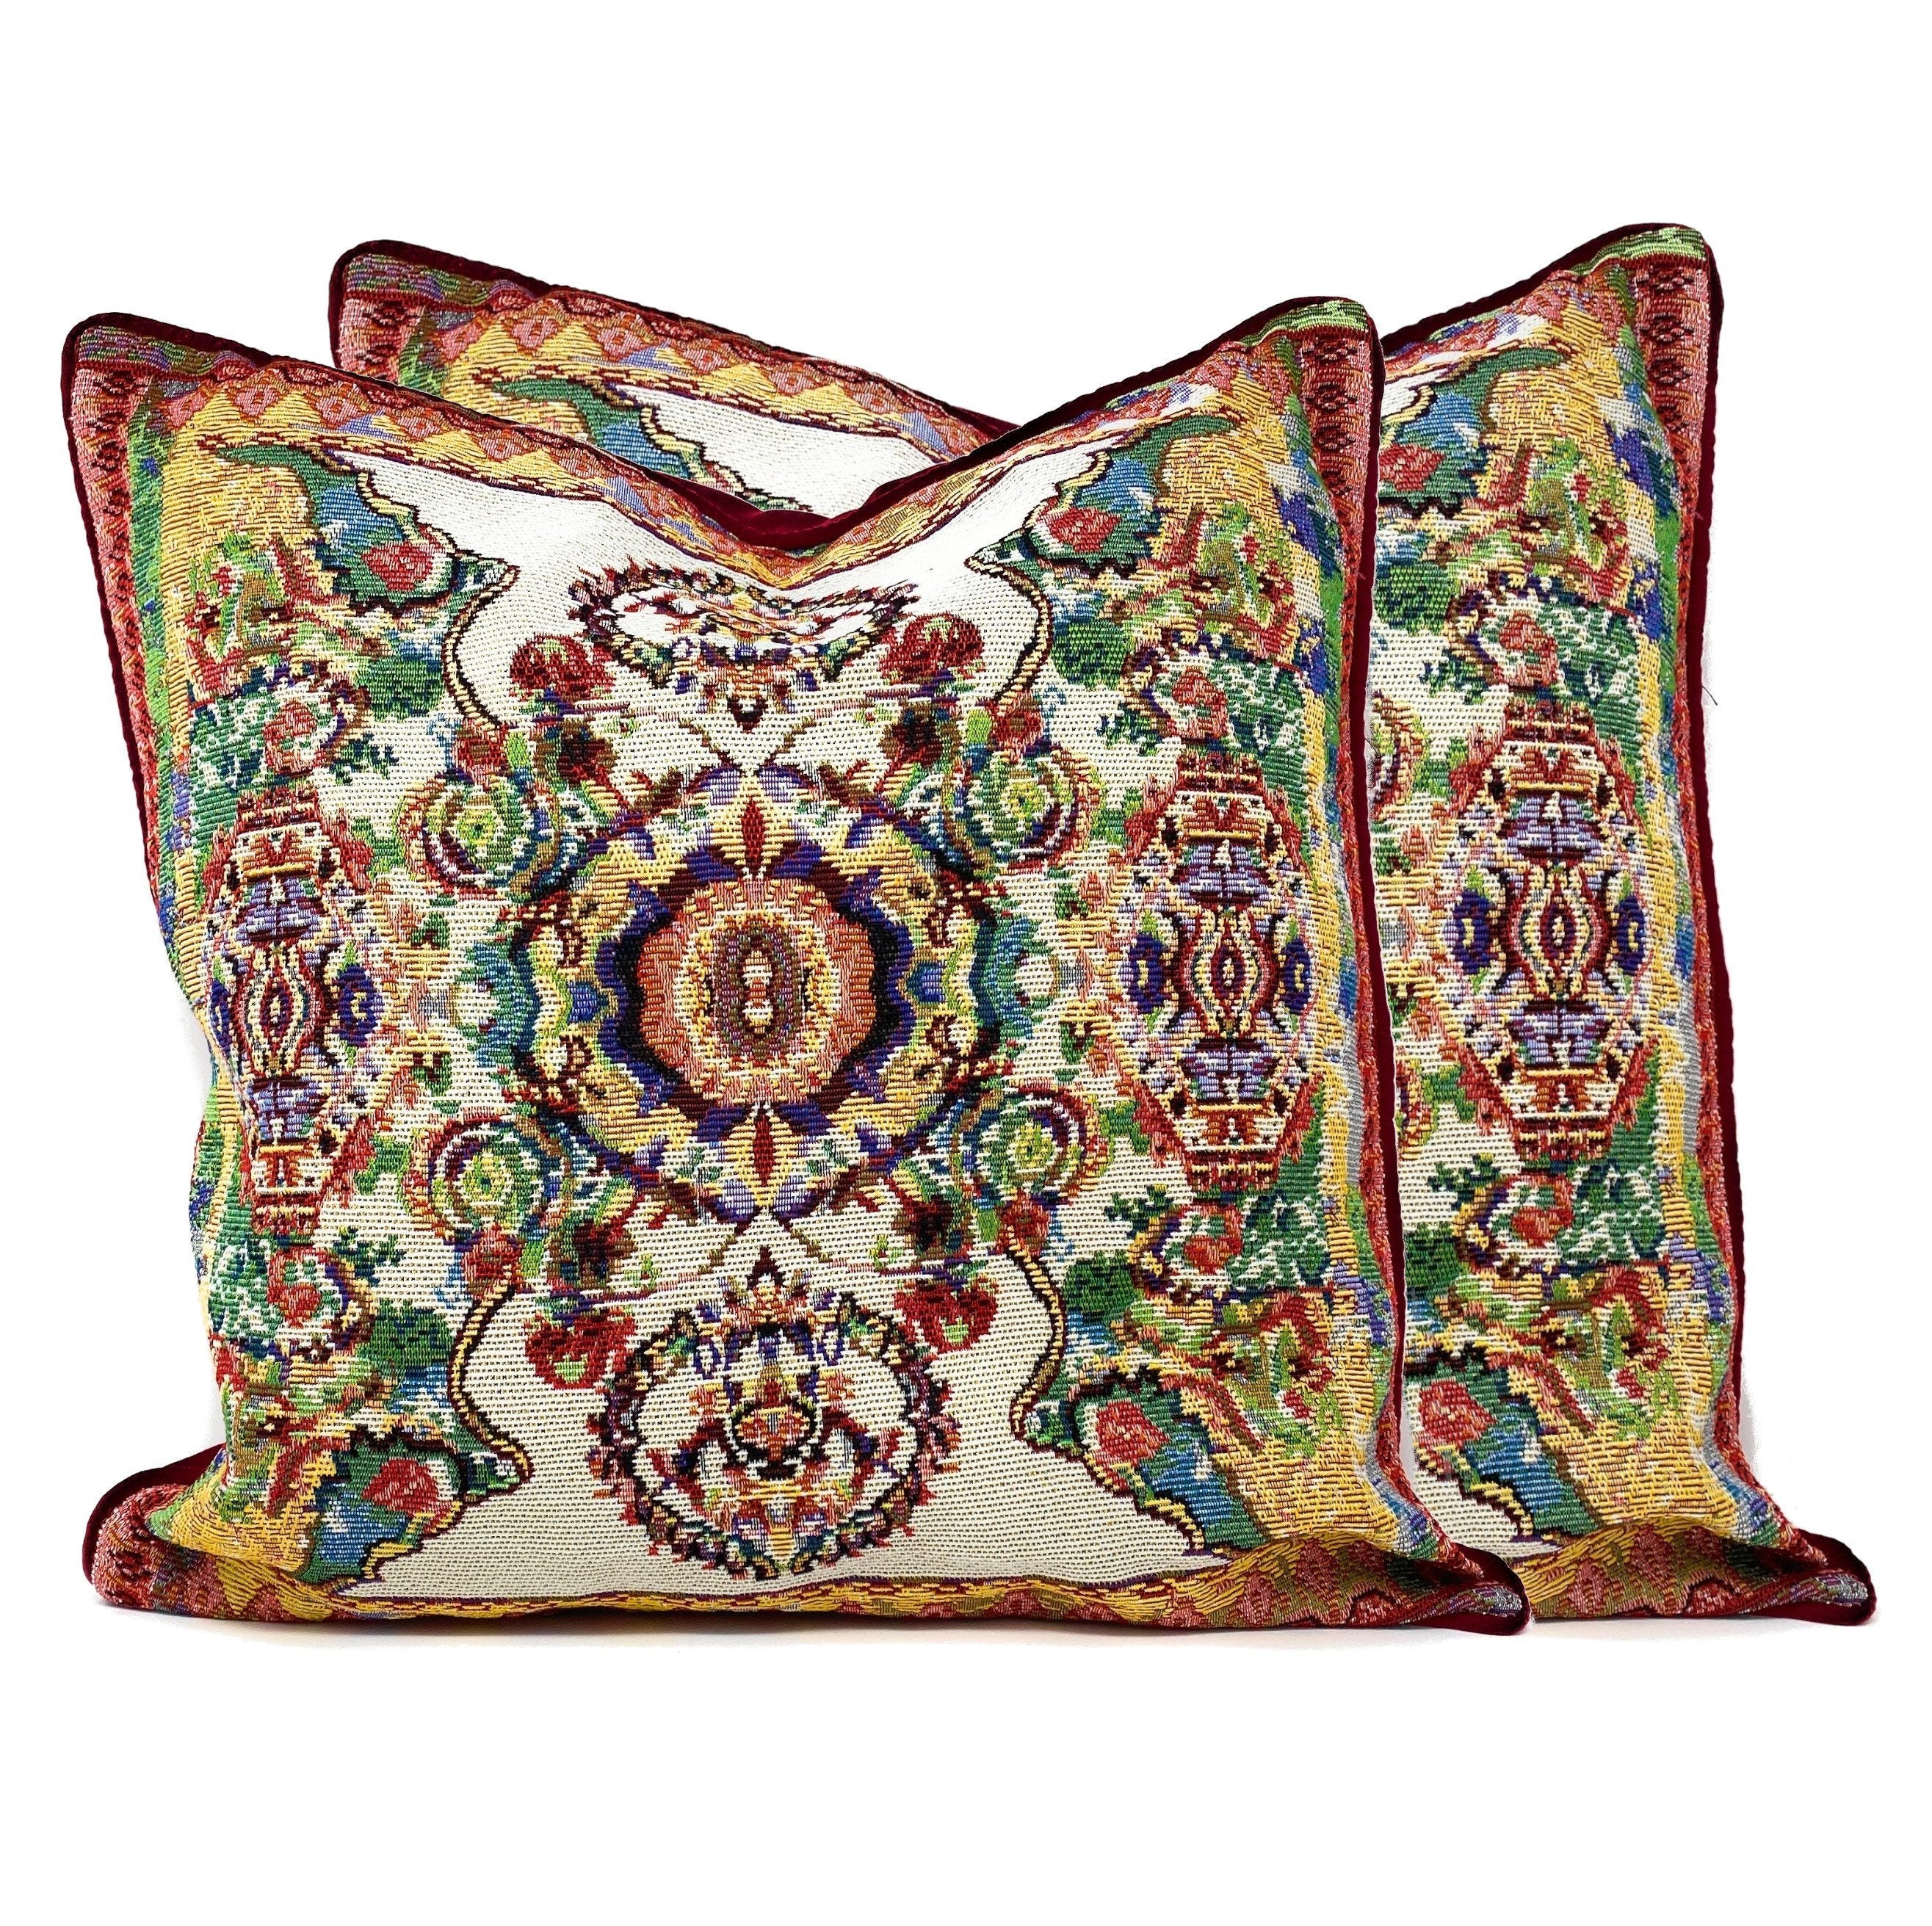 Tache Elegant Ivory Colorful Ornate Paisley Woven Tapestry Throw Pillow Cover (18193) - Tache Home Fashion